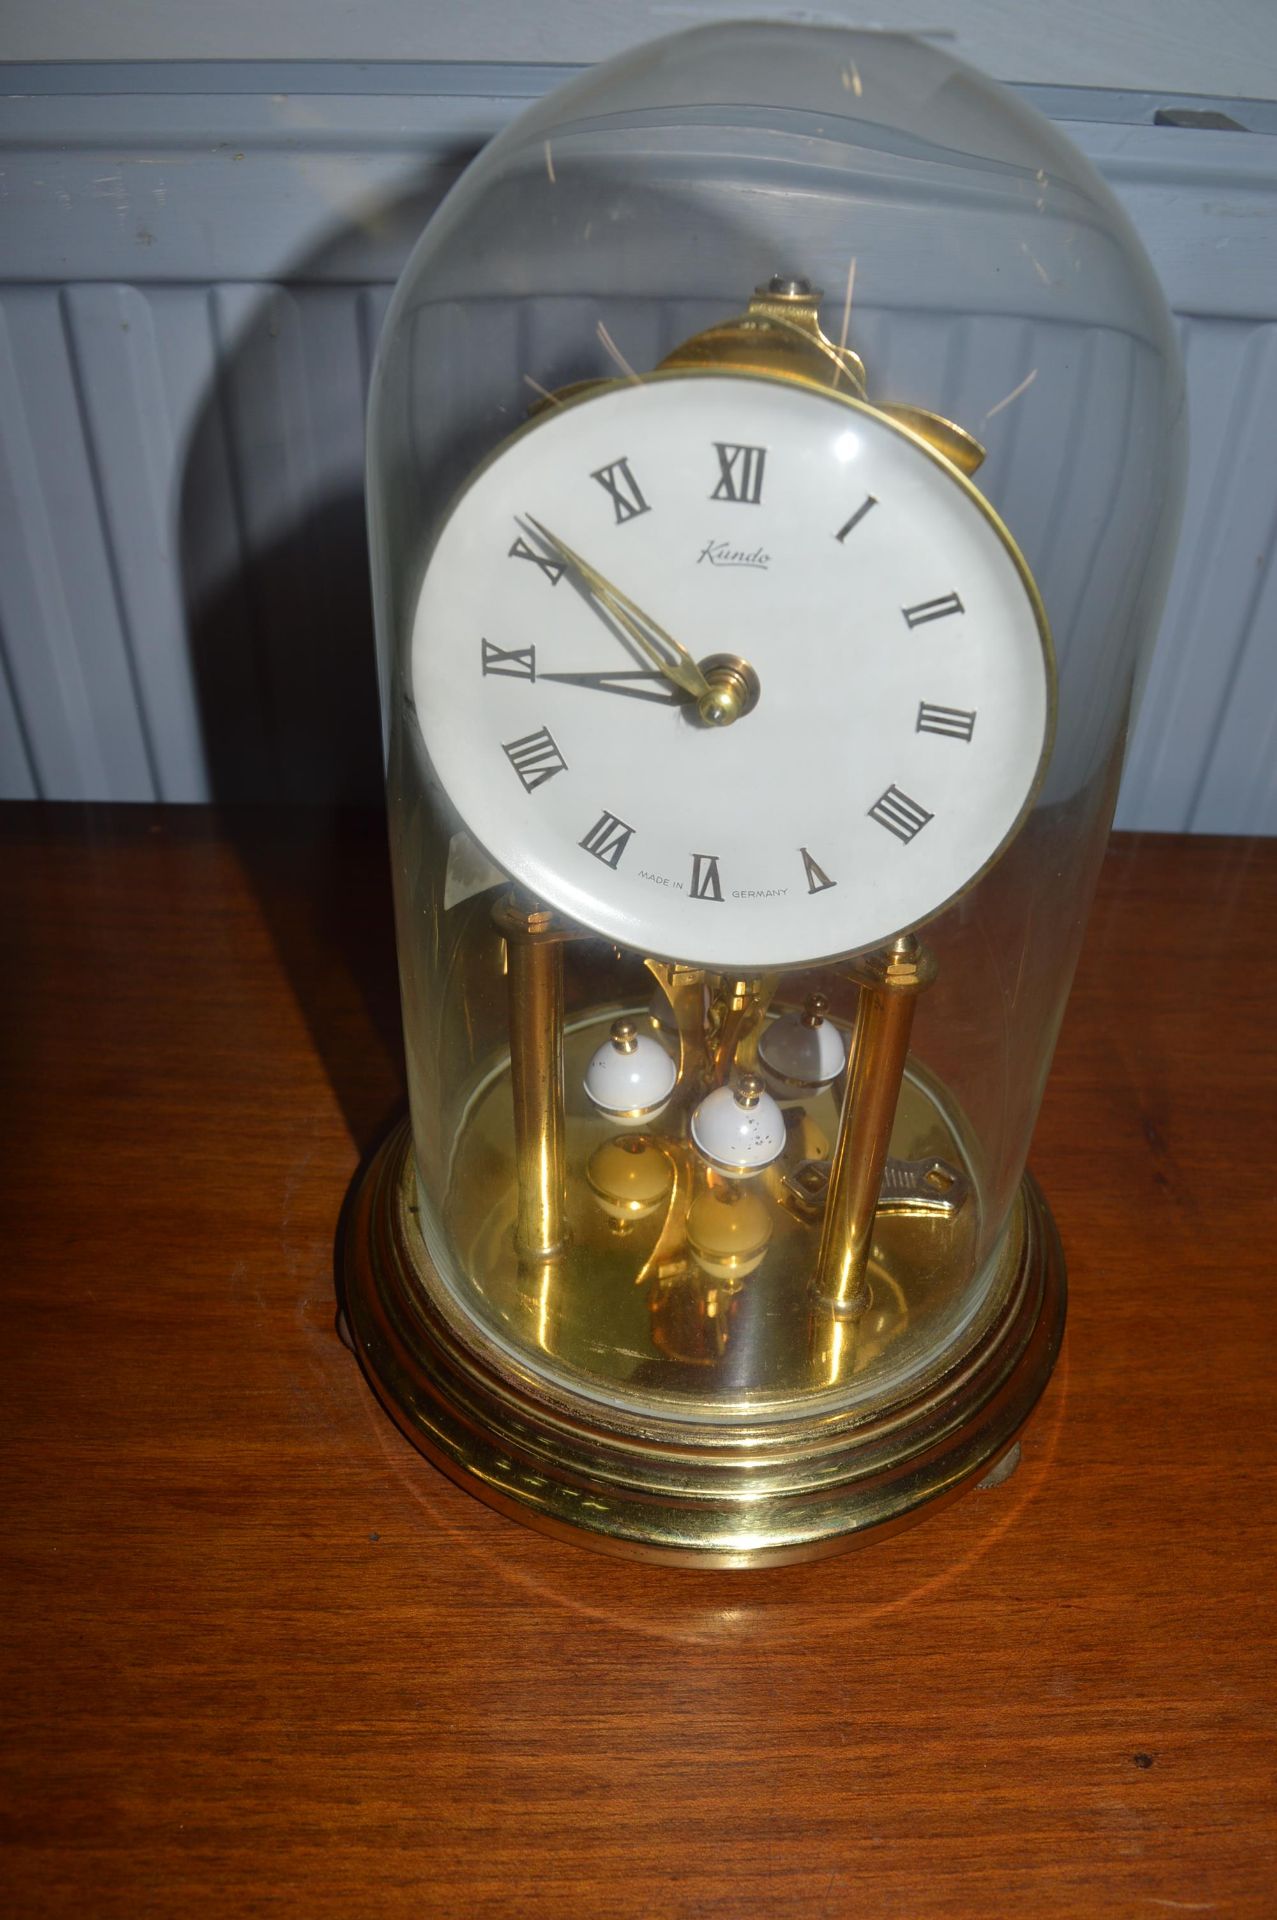 Brass Skeleton Clock with Dome